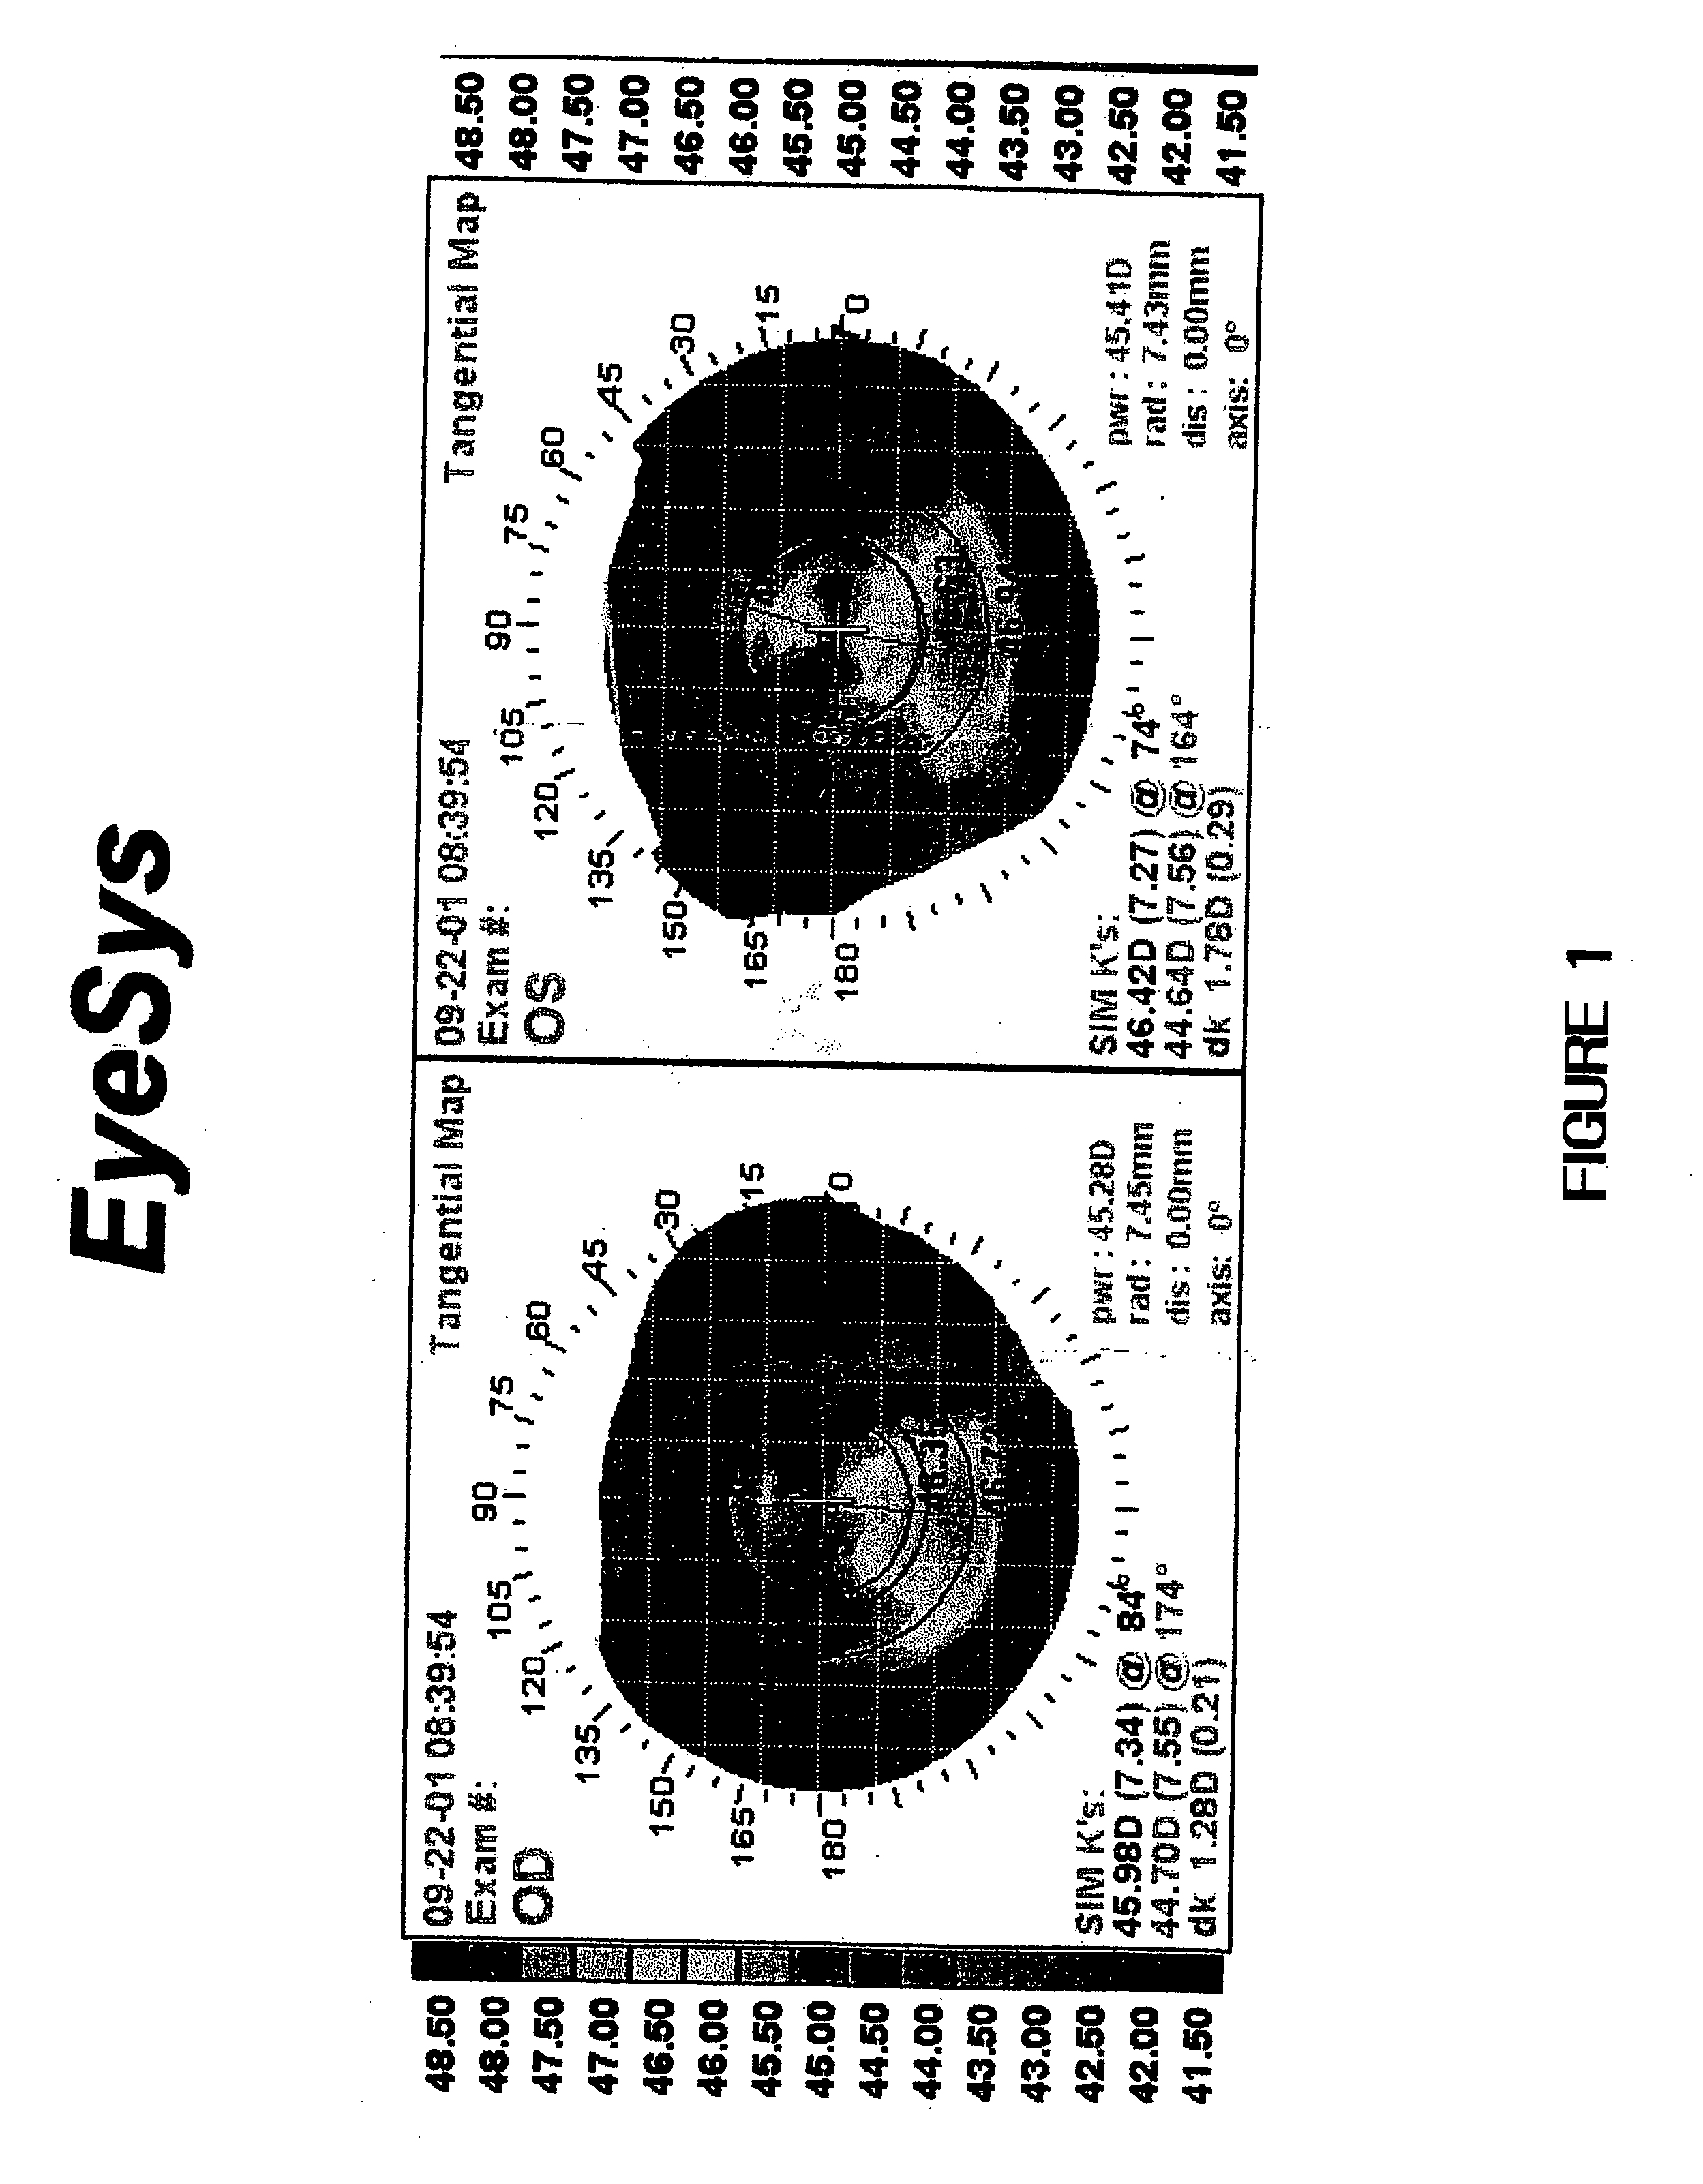 Method for stabilizing changes in corneal curvature in an eye by administering compositions containing stabilizing ophthalmic agents